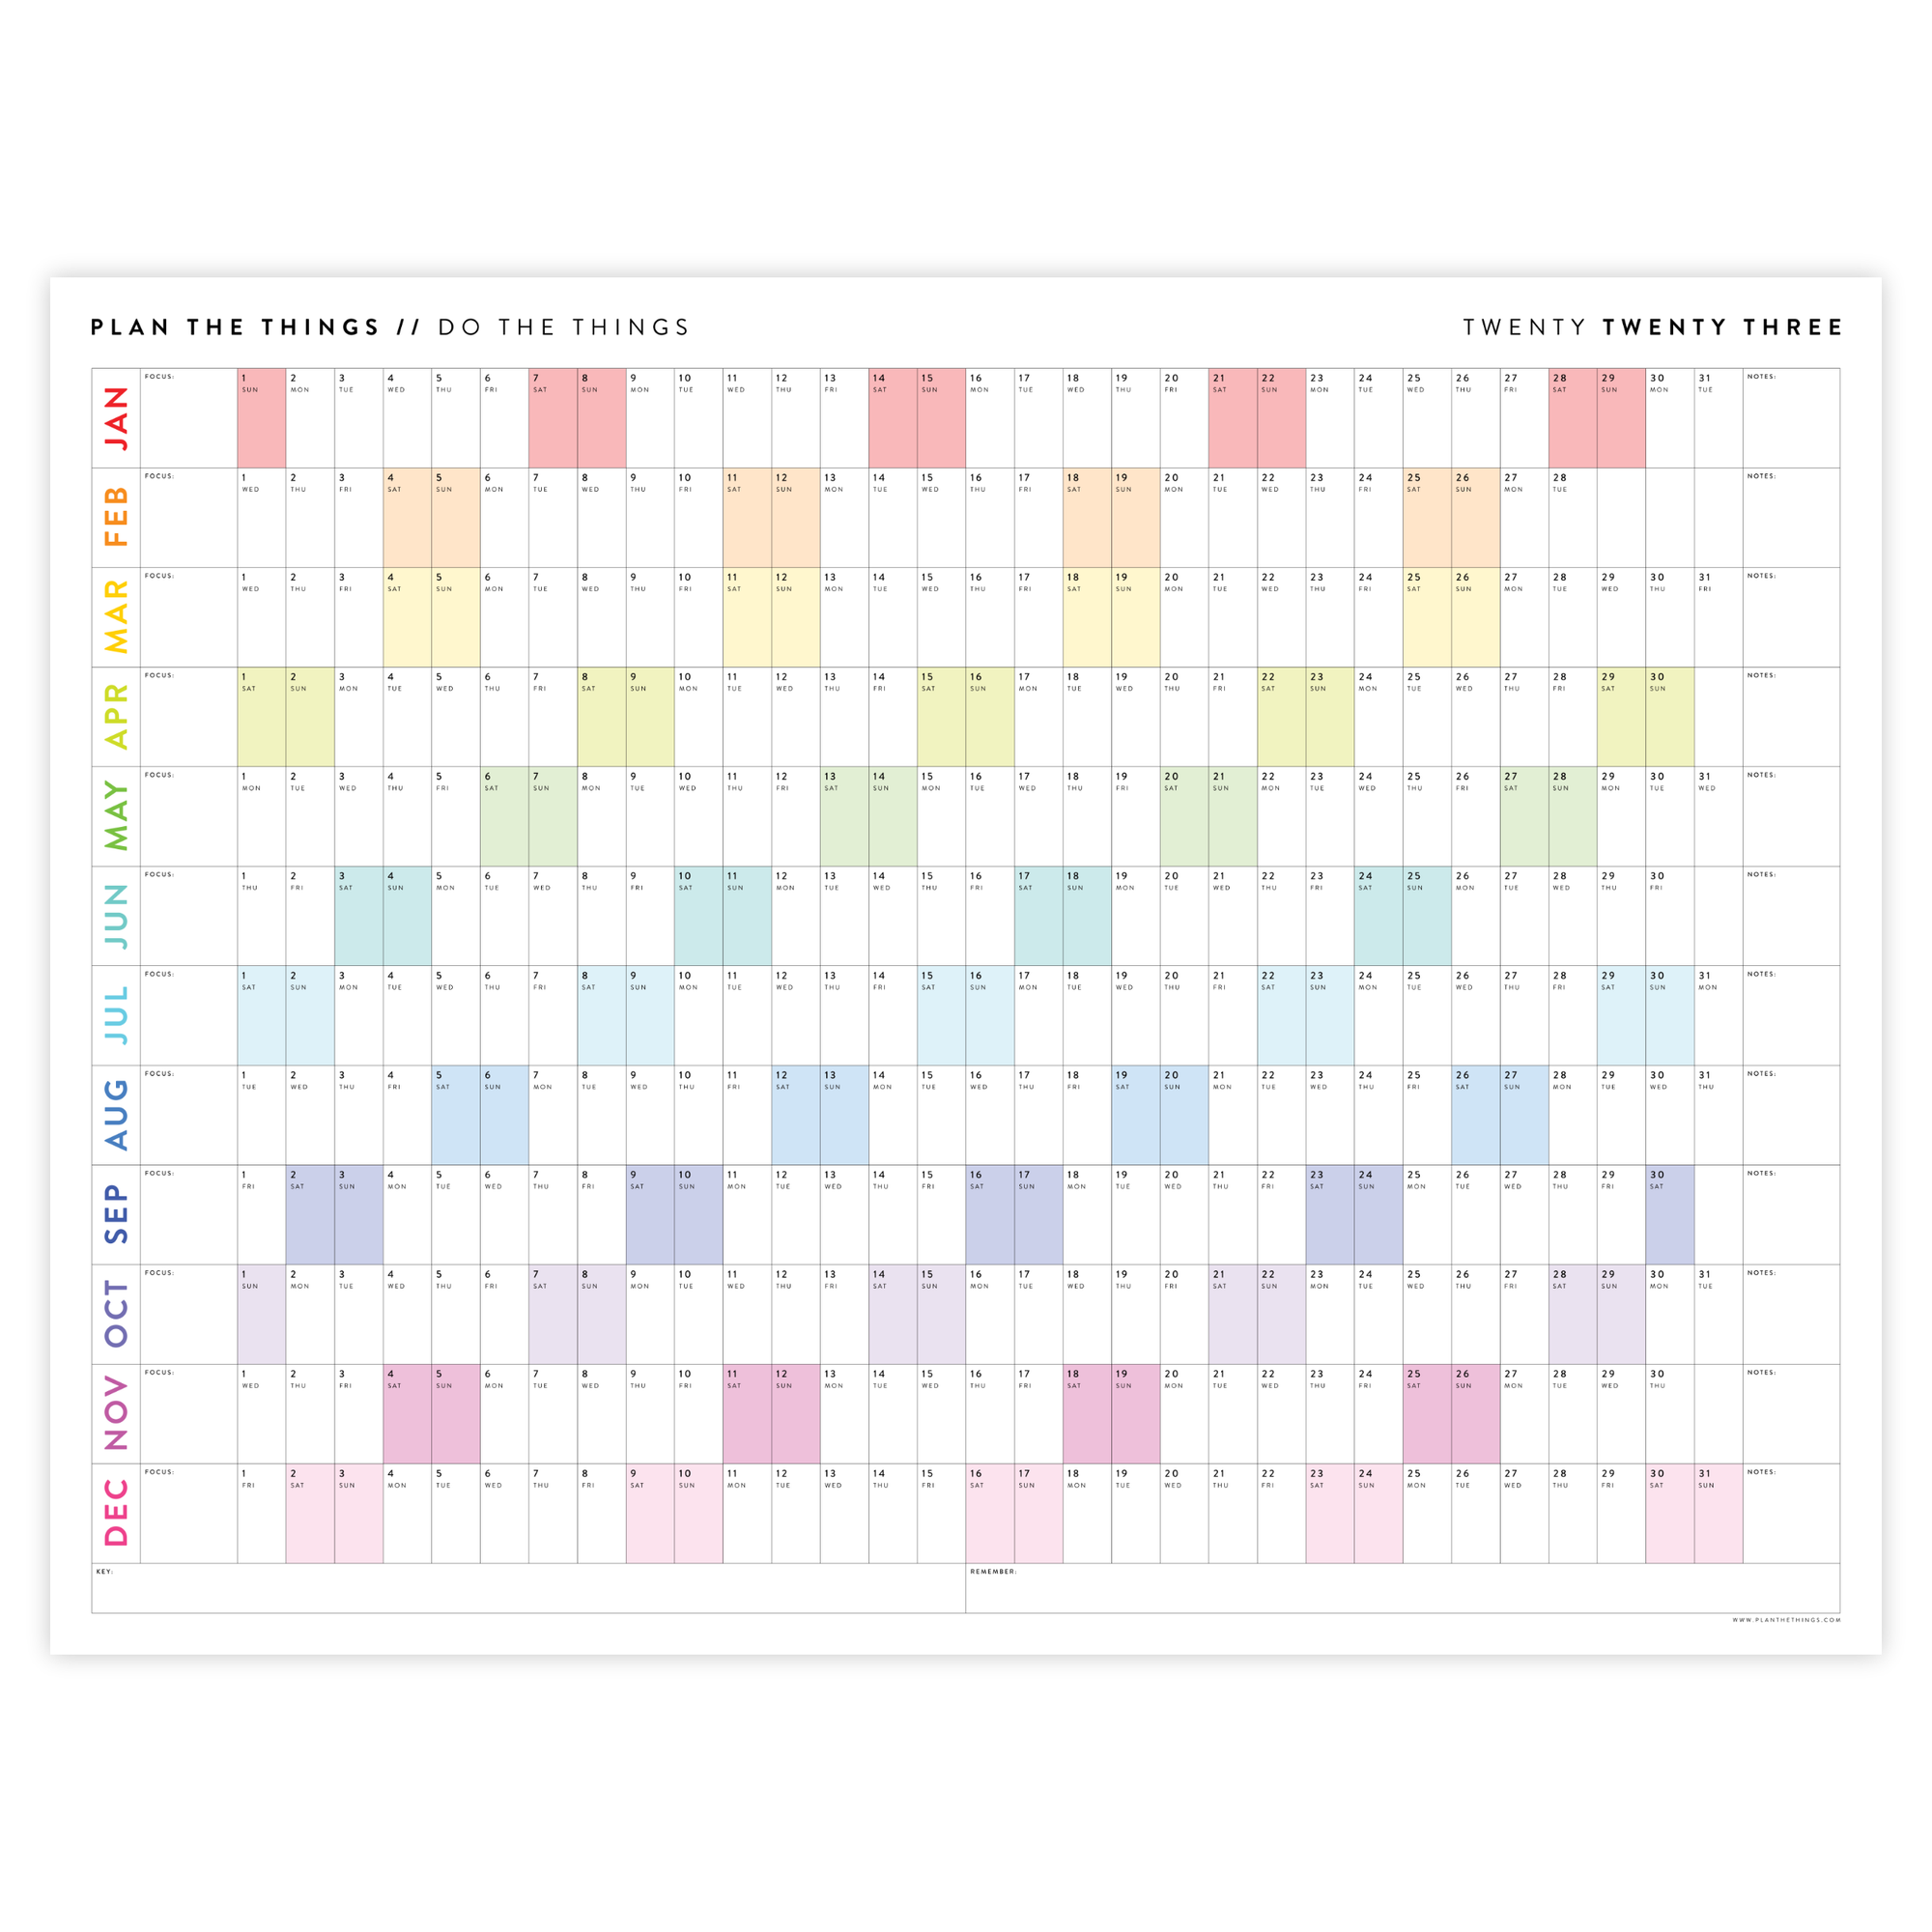 PRINTABLE HORIZONTAL 2023 WALL CALENDAR WITH RAINBOW WEEKENDS - INSTANT DOWNLOAD